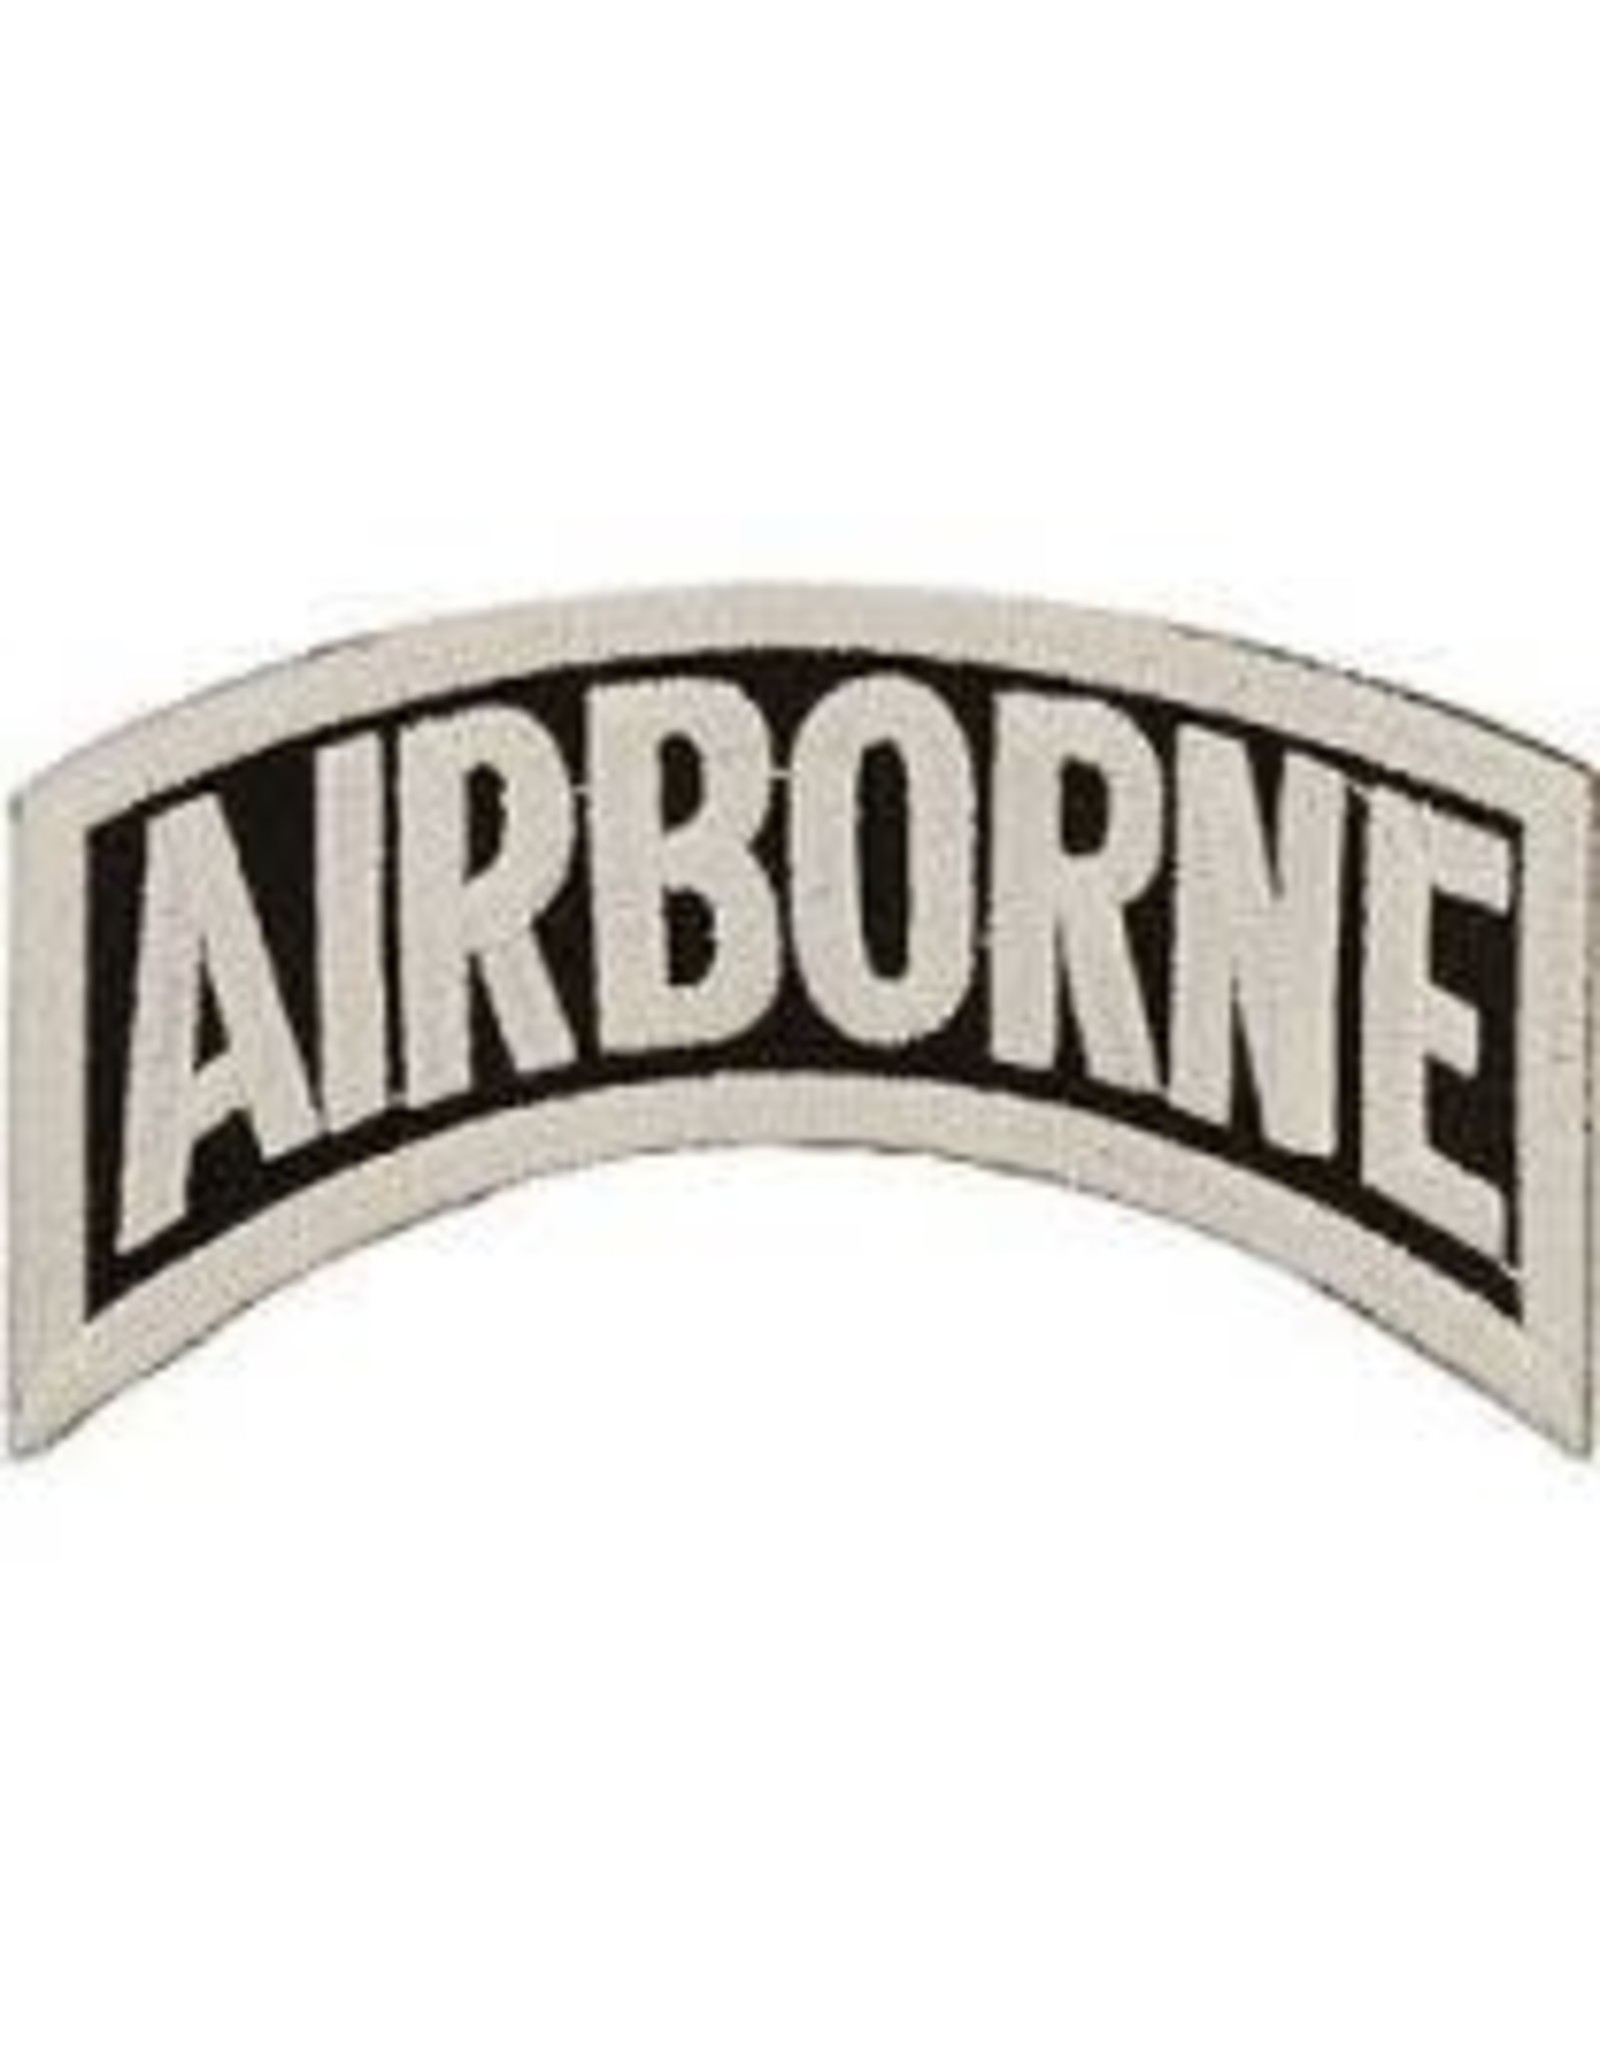 Patch - Army Tab Airborne